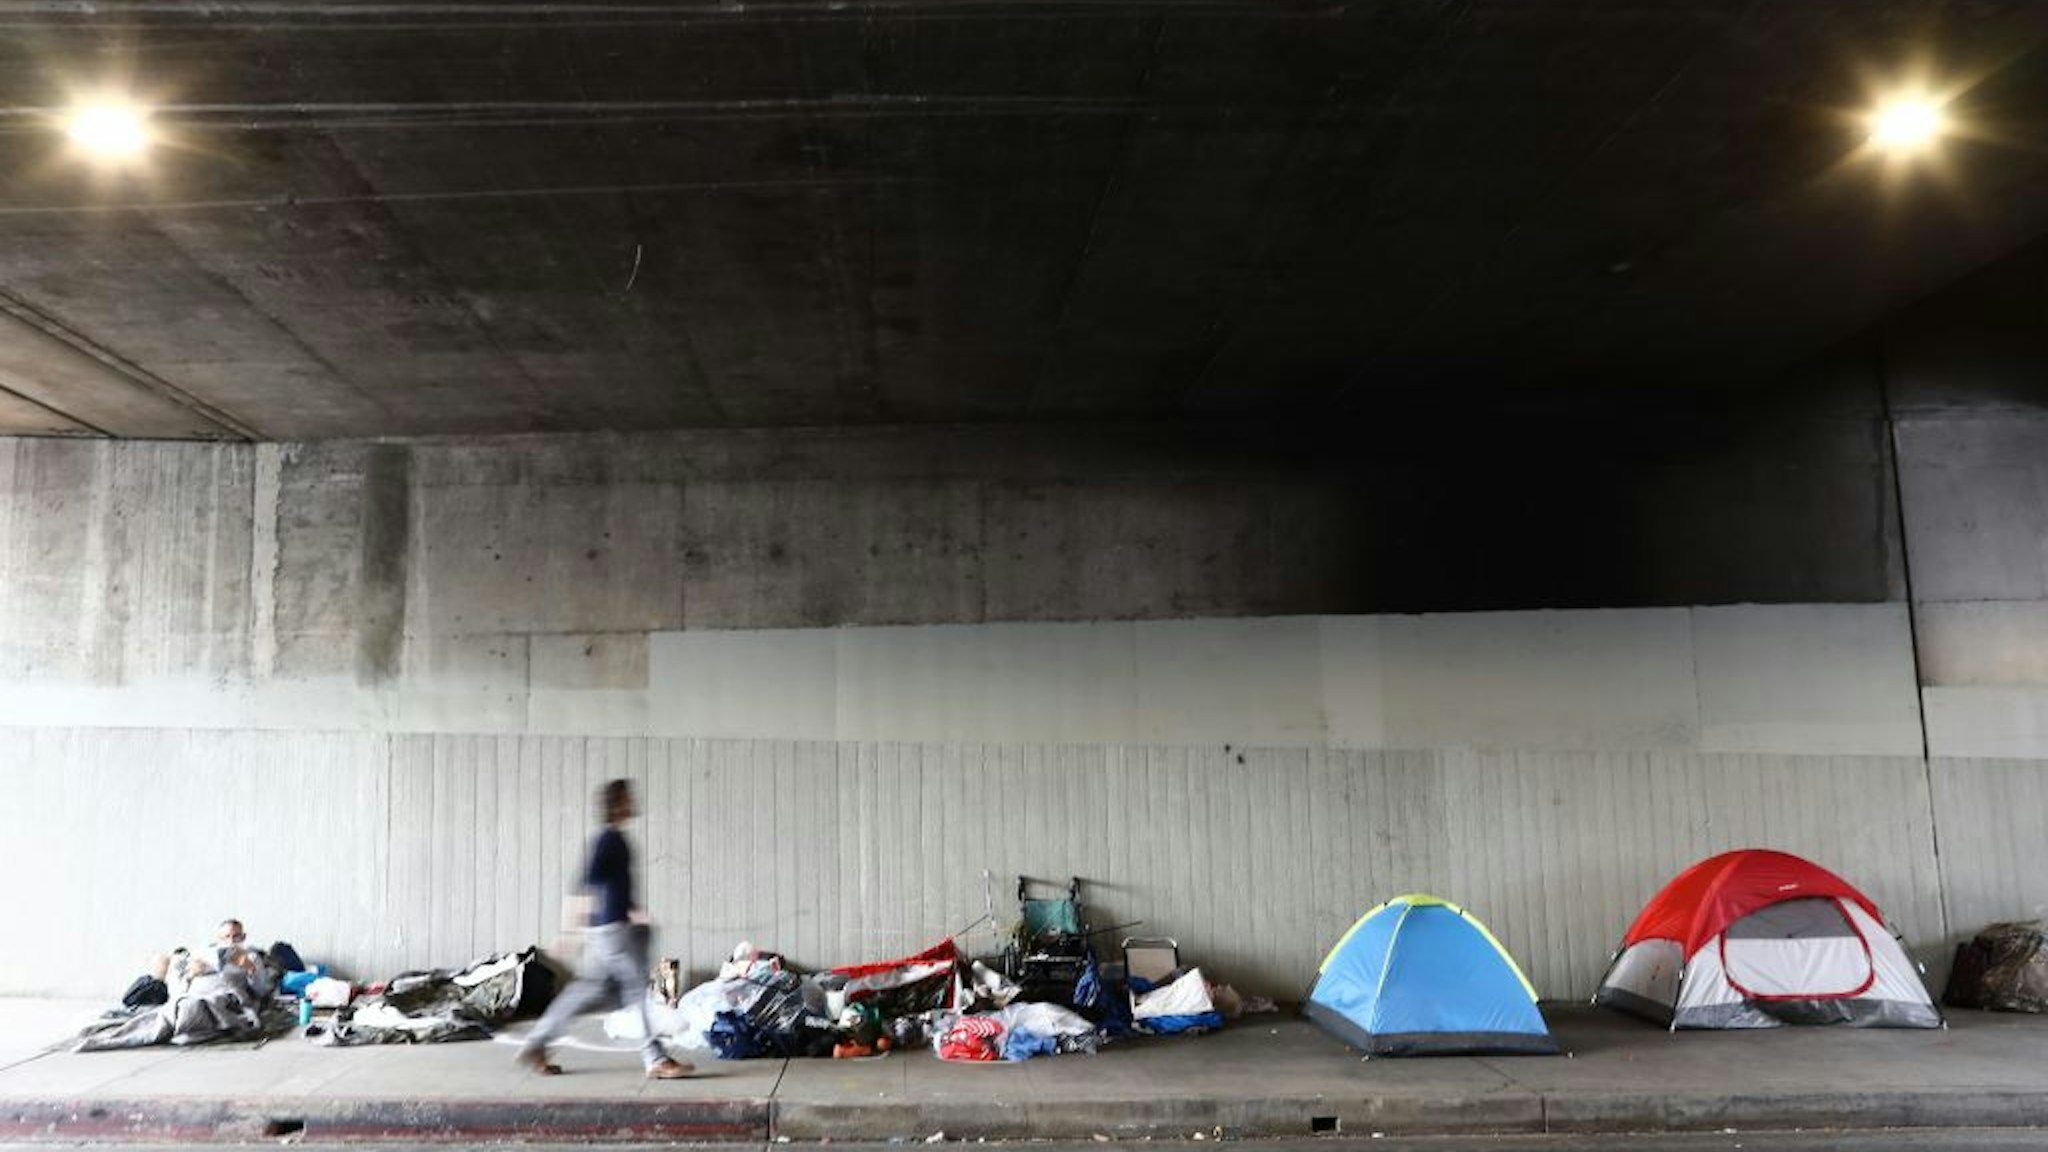 LOS ANGELES, CALIFORNIA - JUNE 05: A man walks past a homeless encampment beneath an overpass on June 5, 2019 in Los Angeles, California. The homeless population count in Los Angeles County leaped 12 percent in the past year to almost 59,000, according to officials.